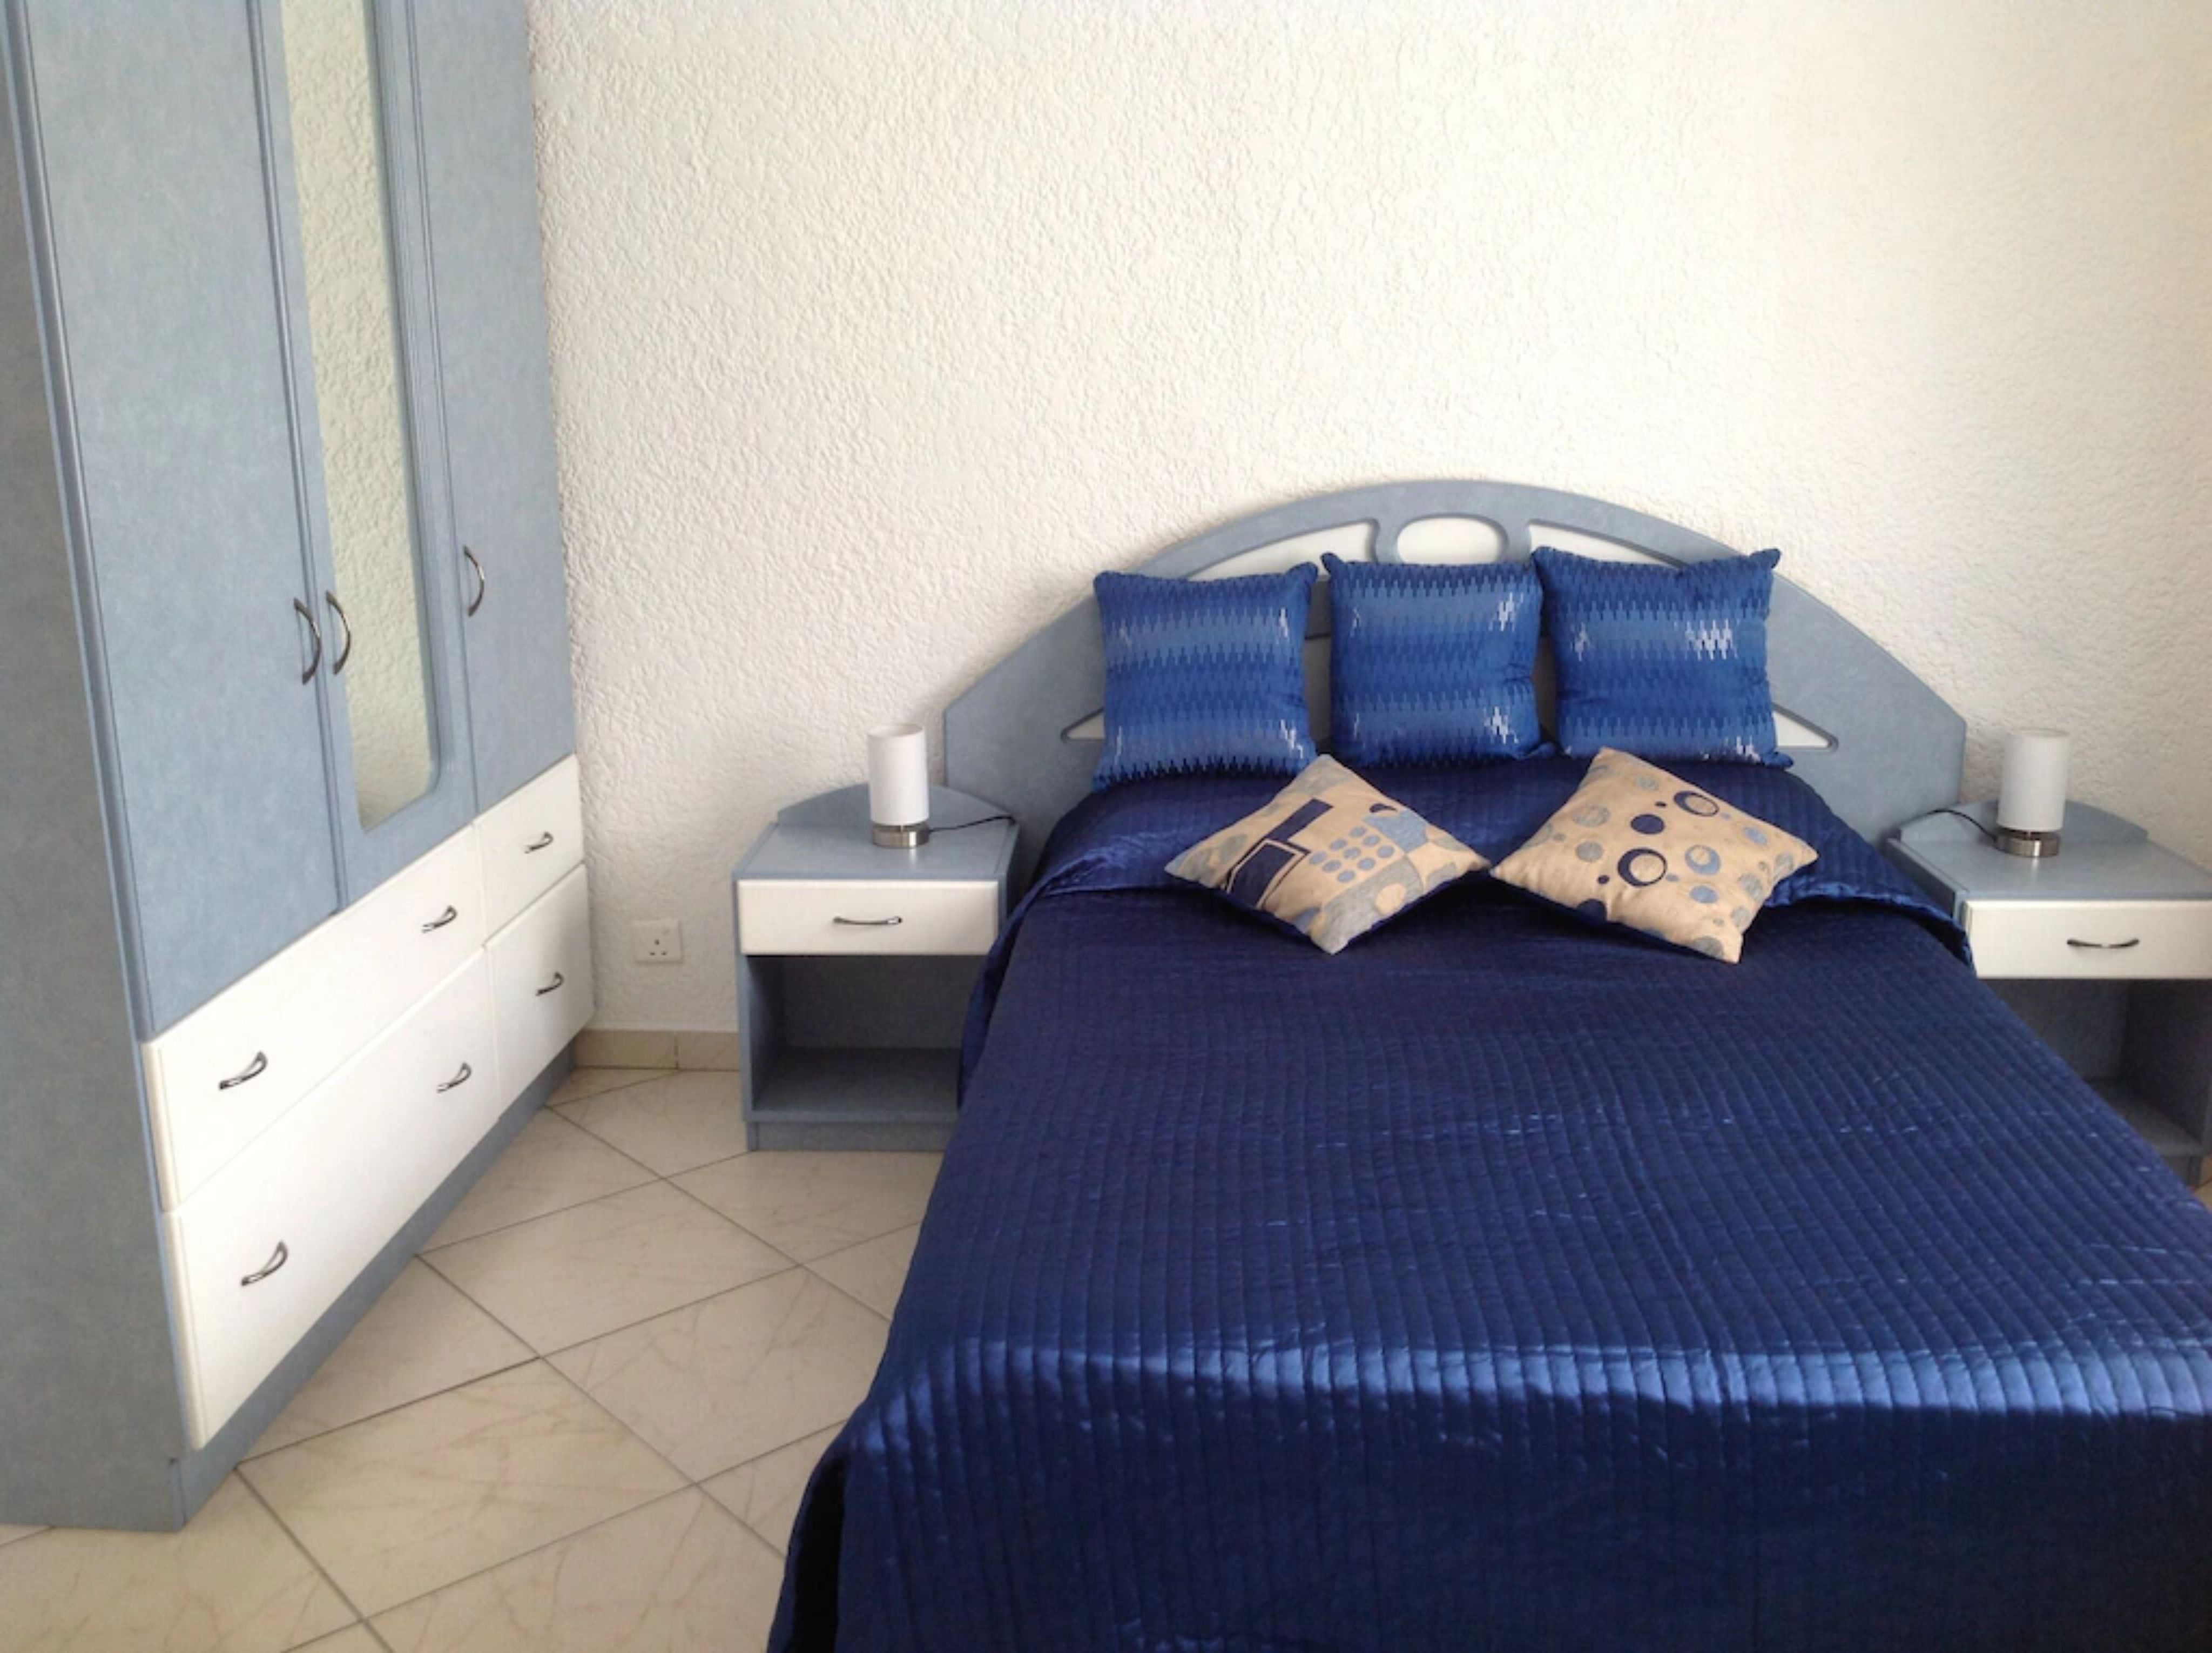 Lovely apartment in Flic en Flac, close to the lovely beach and all amenities.